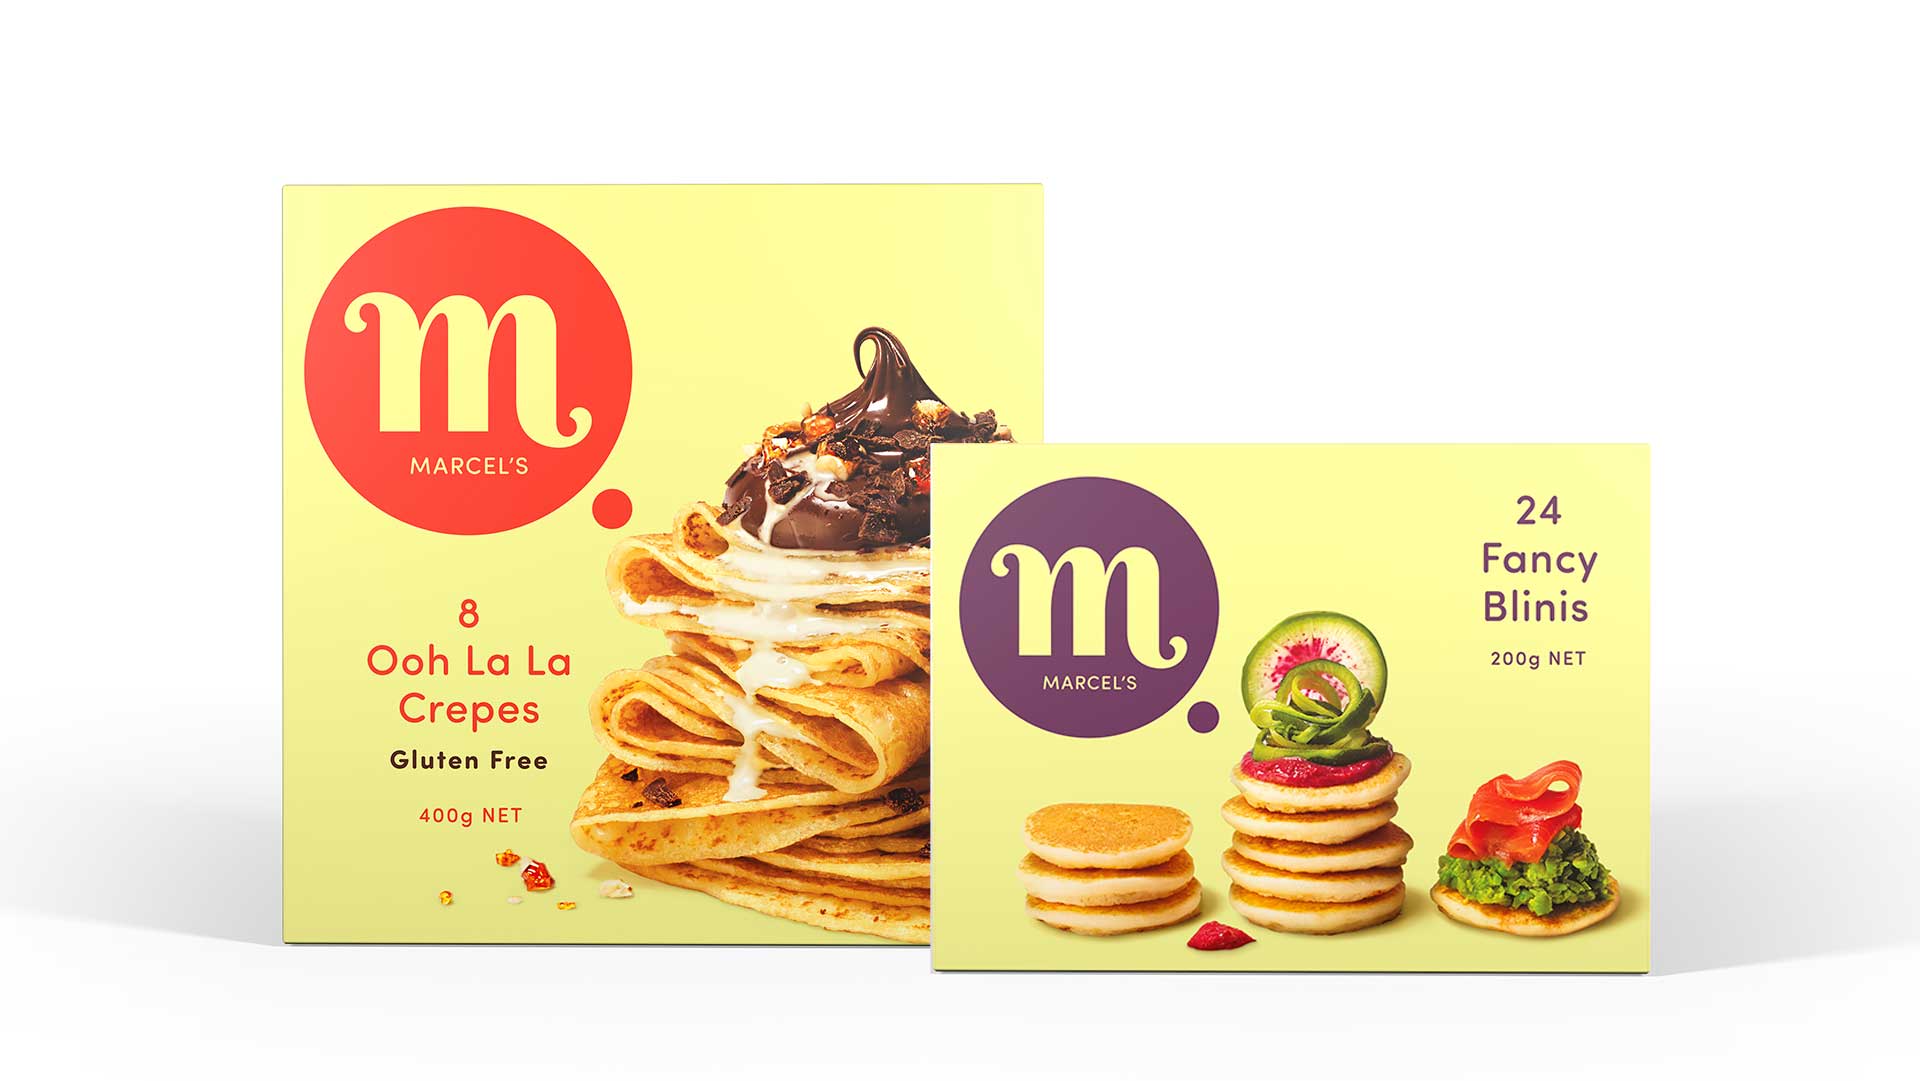 Win a Marcel’s party pack of crêpes and blinis